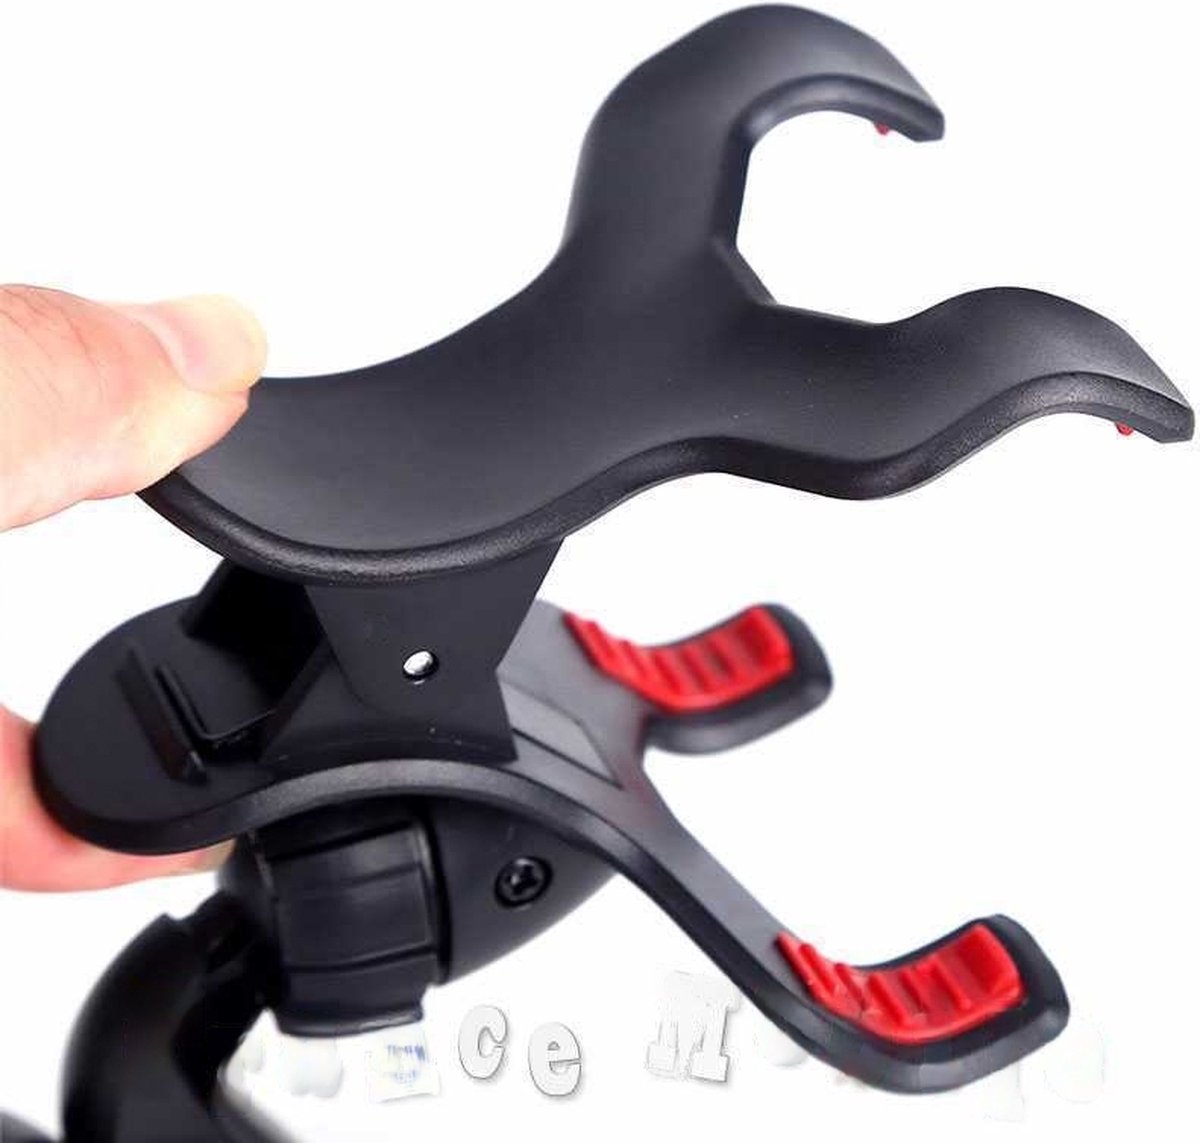 Car Phone Holder Suction Cup Windshield Double Clamp for Phone Smartphone GPS - Firm and Secure Mounting in Your Vehicle